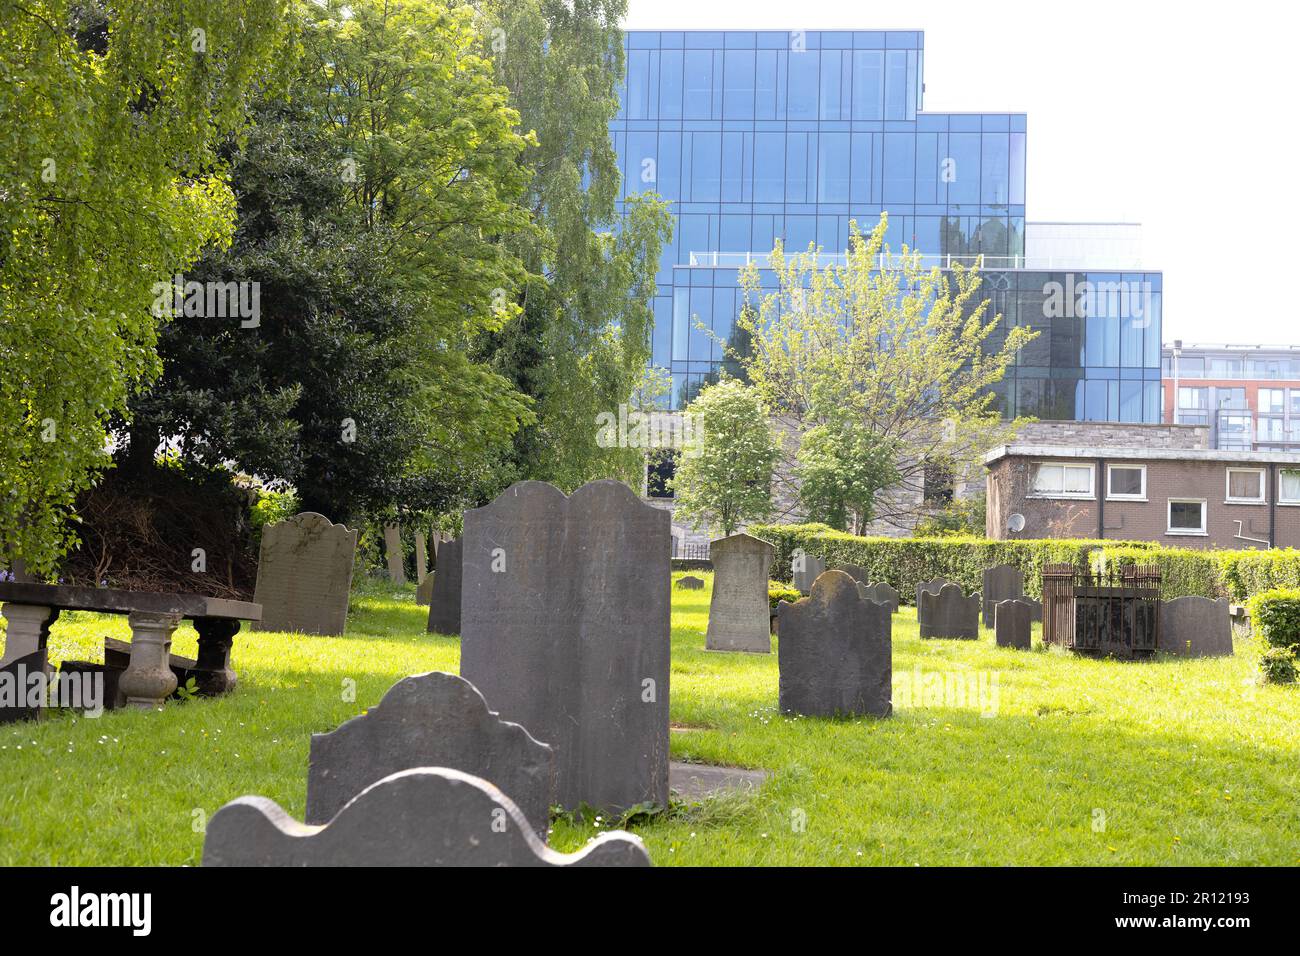 Modern buildings in the background and old grave stones from the cemetery at St. Michan's Church in Dublin, Ireland in foreground. Stock Photo